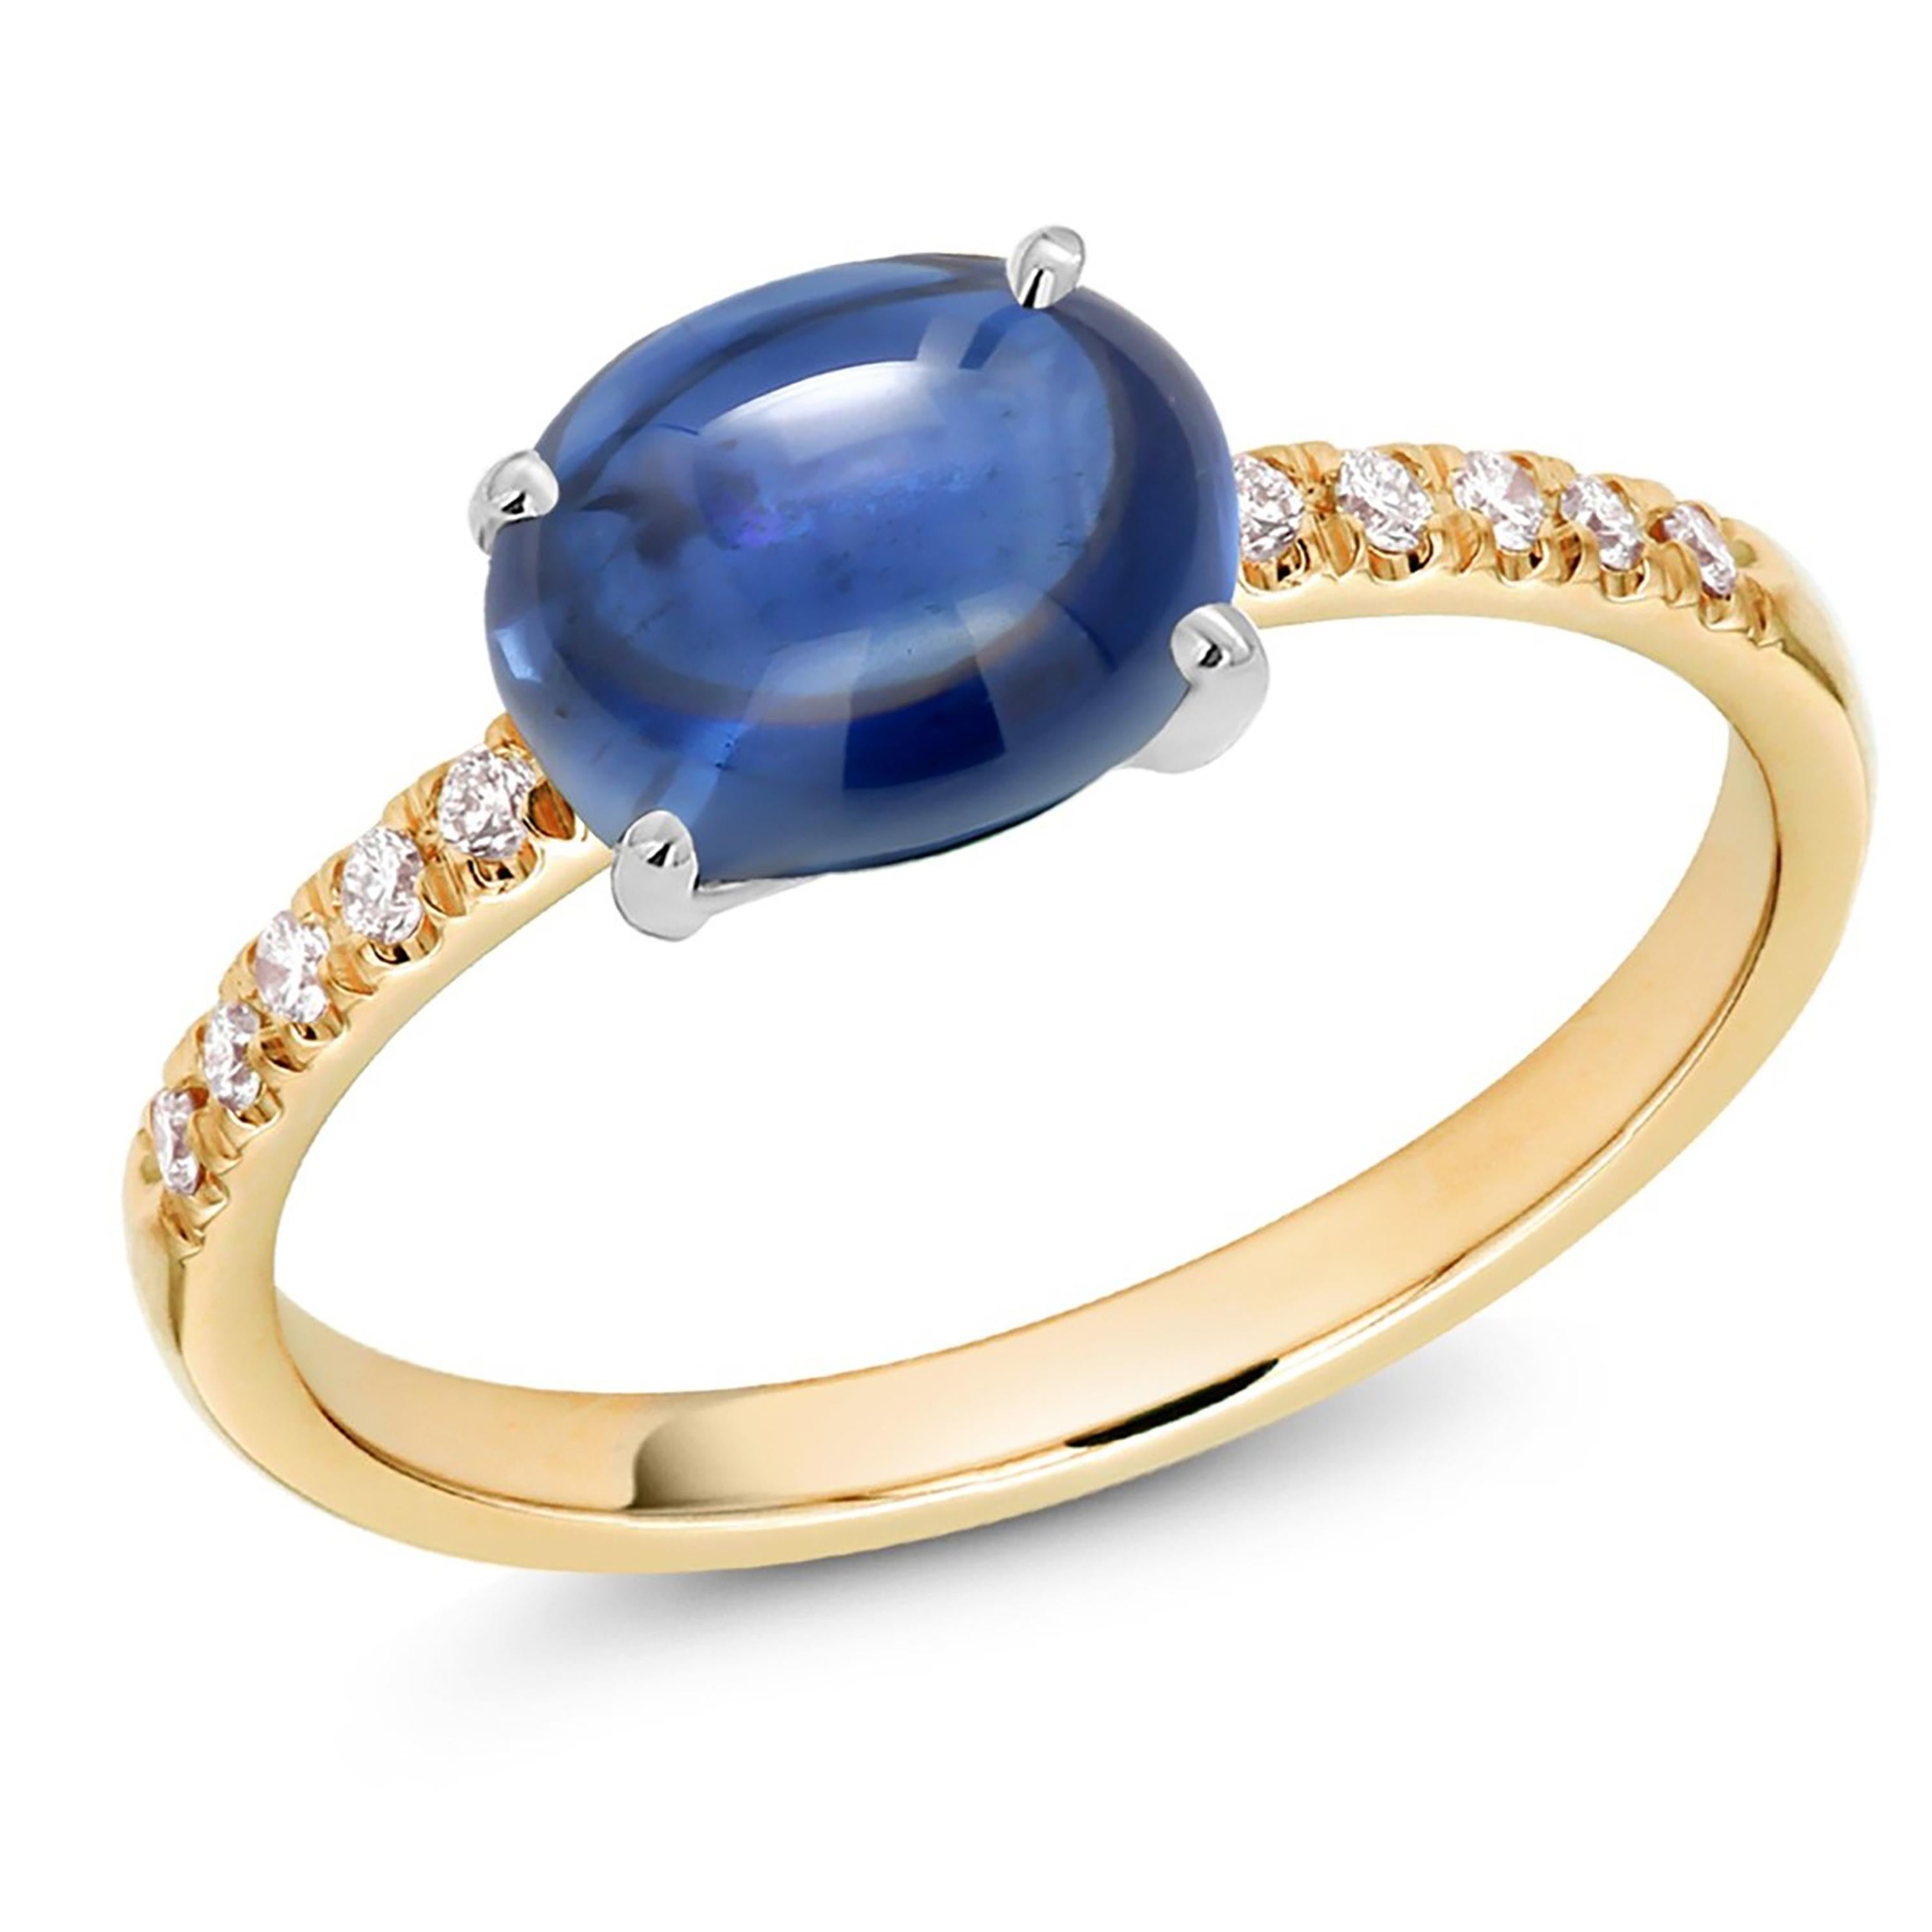 Oval Cut Ceylon Cabochon Sapphire Diamond Yellow and White Gold Cocktail Ring